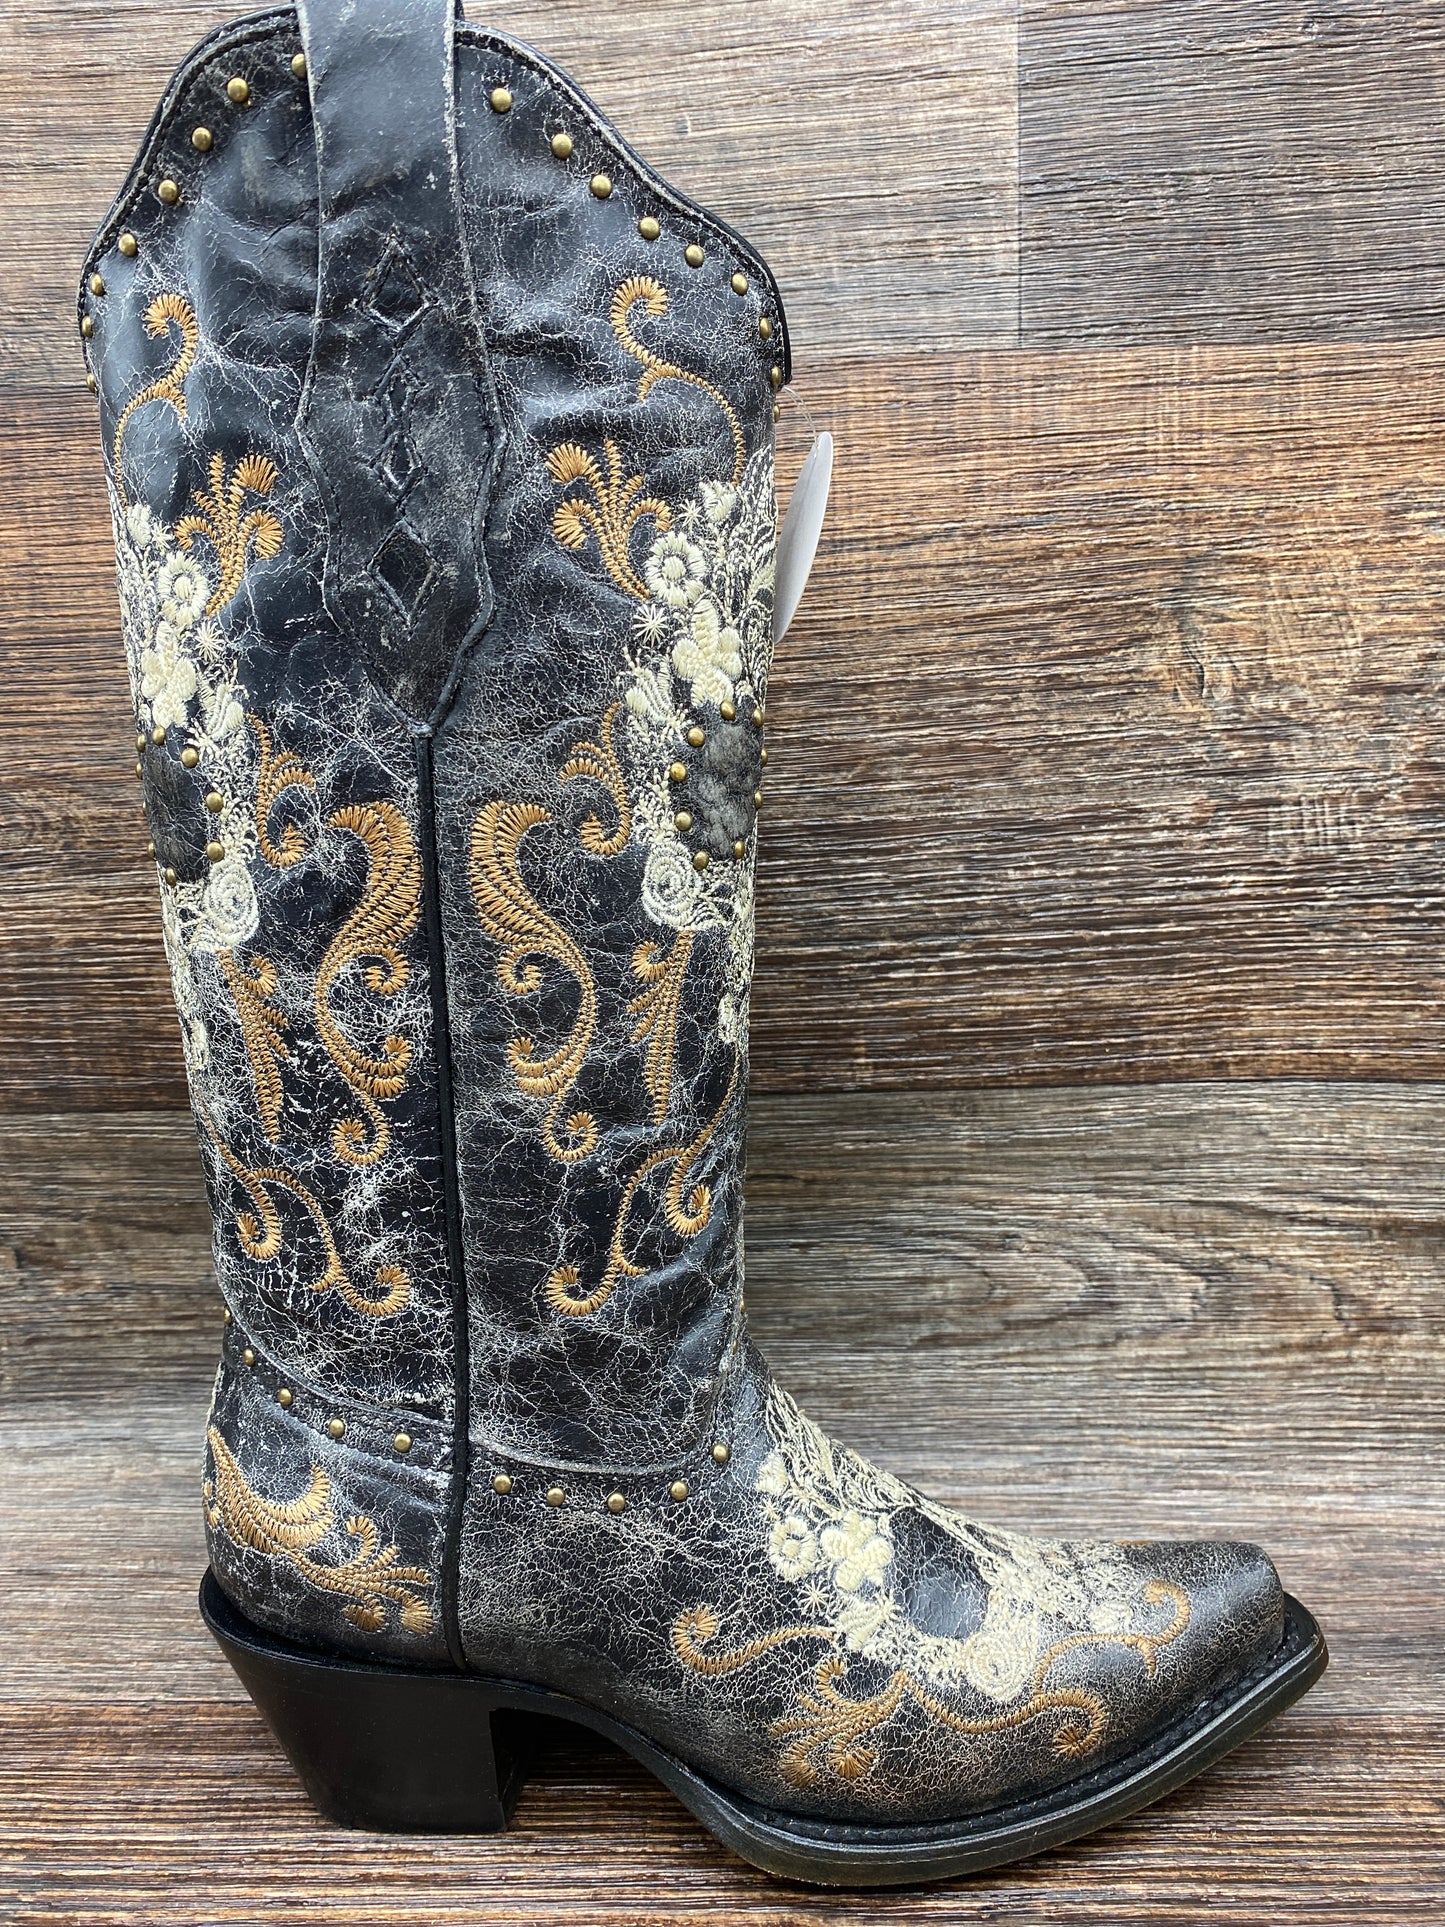 z5003 Women's Snip Toe Black & White Floral Skull Embroidered Western Boot by Corral